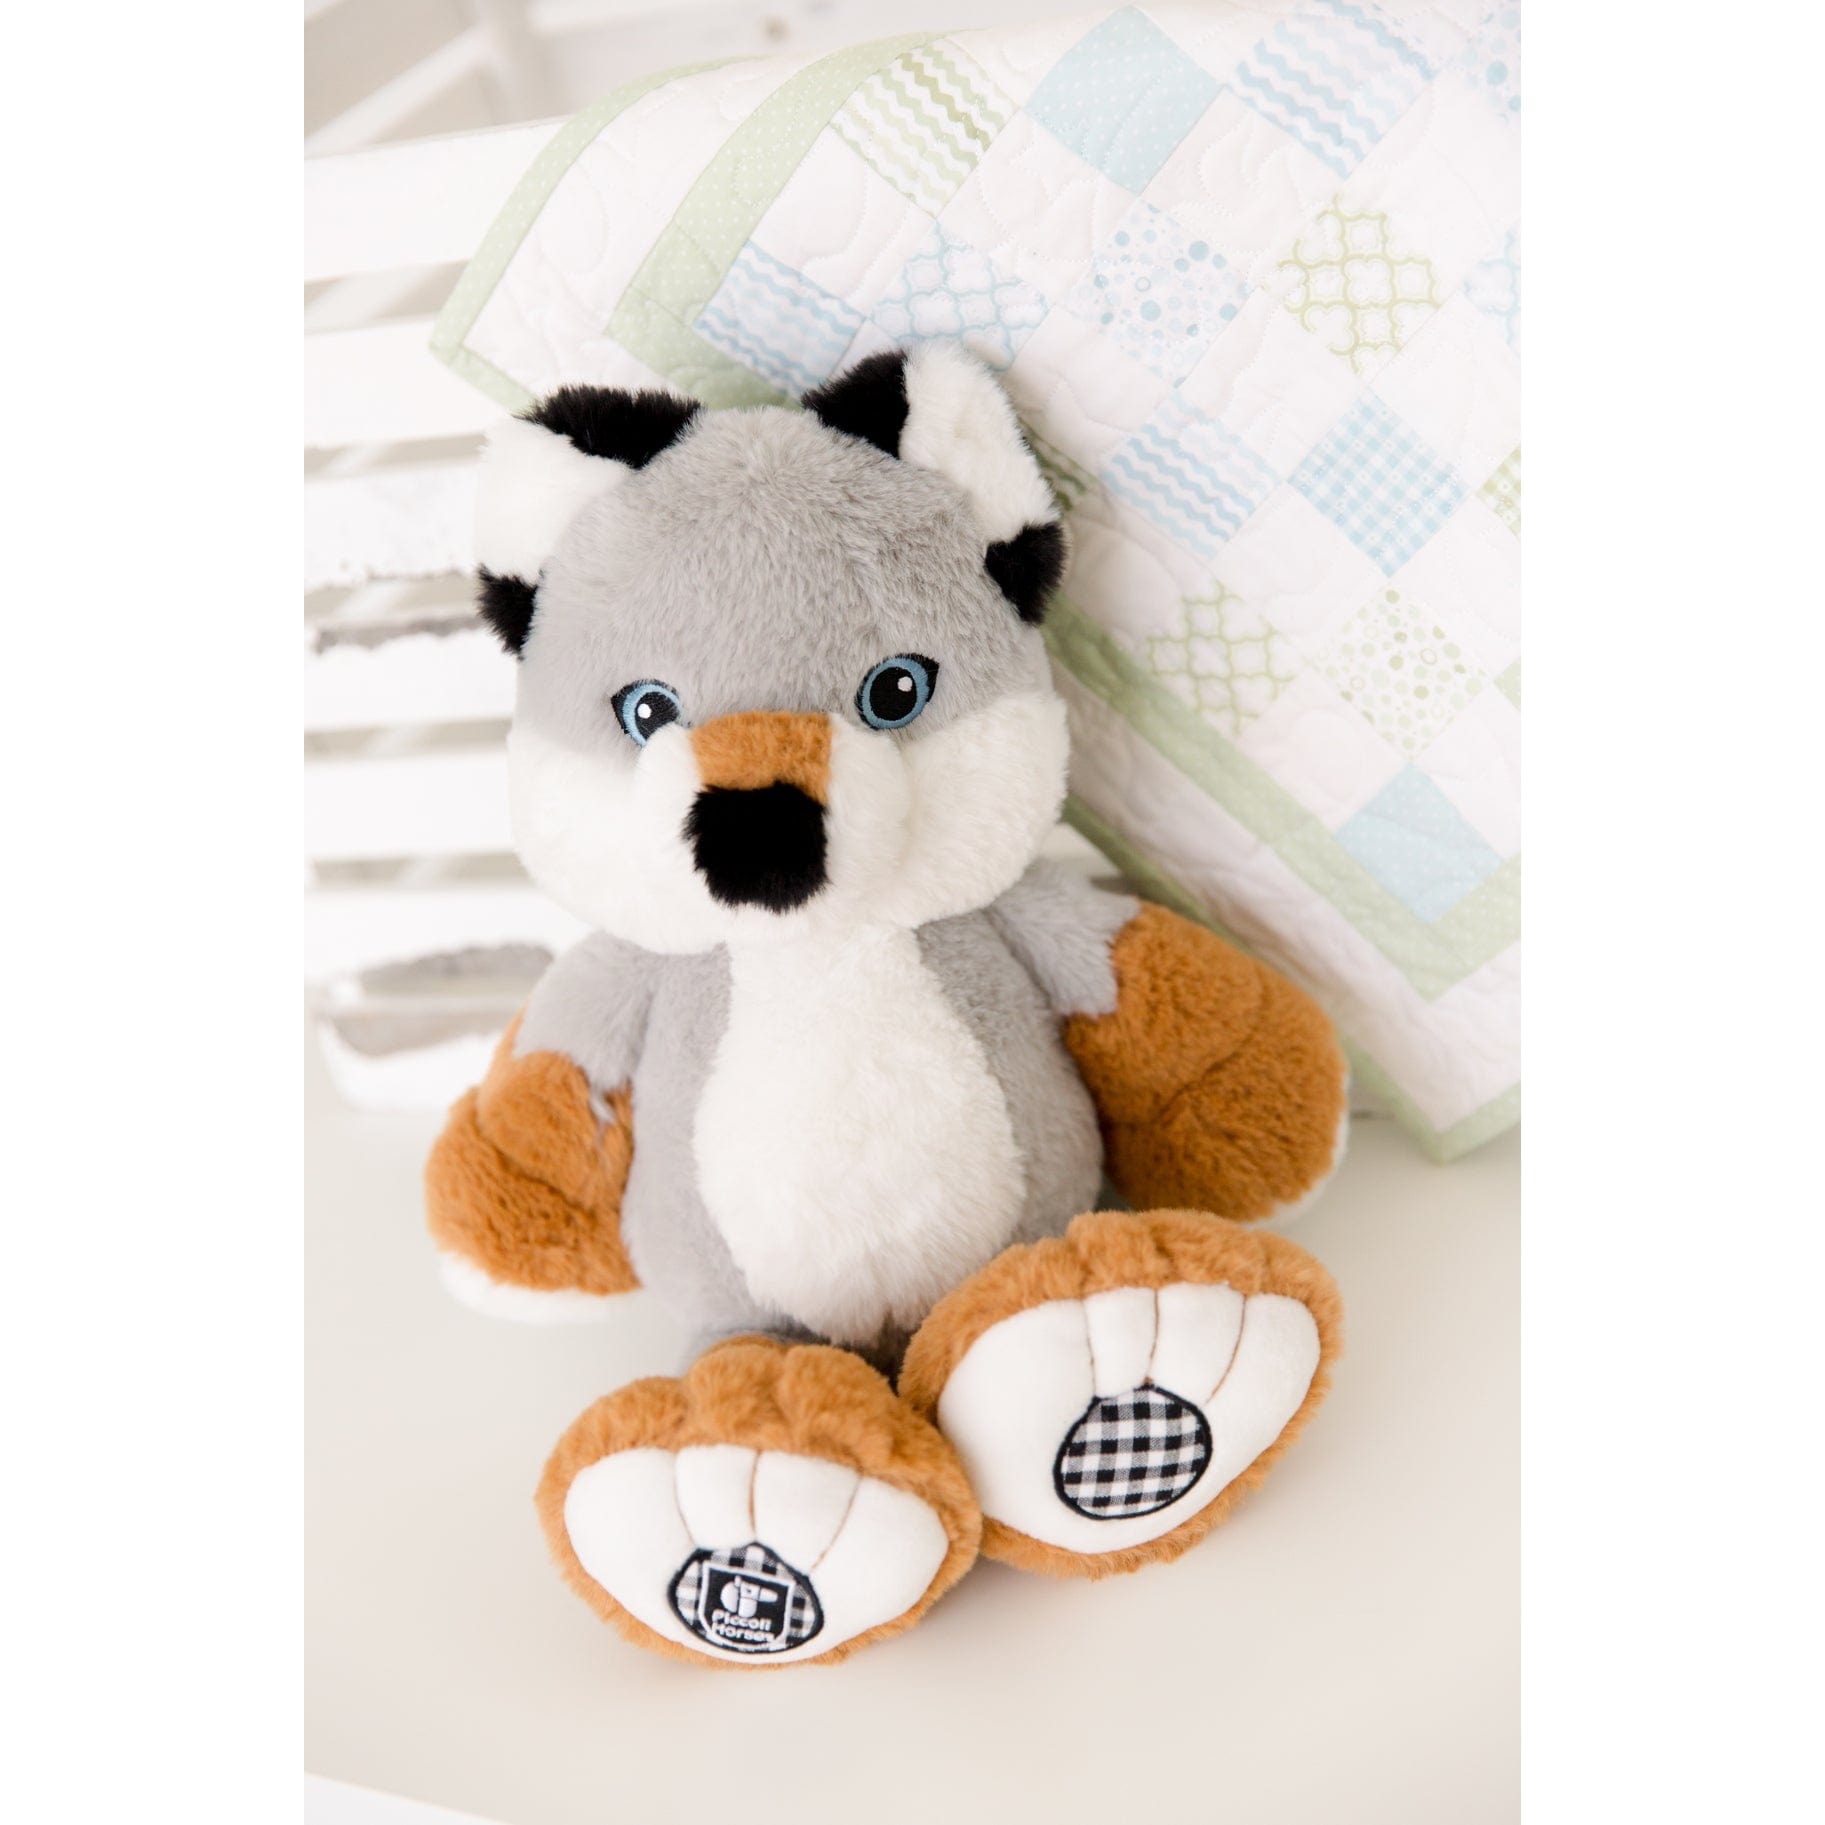 Plush Fox by Piccoli Super Cute! - The Pink Pigs, Animal Lover's Boutique